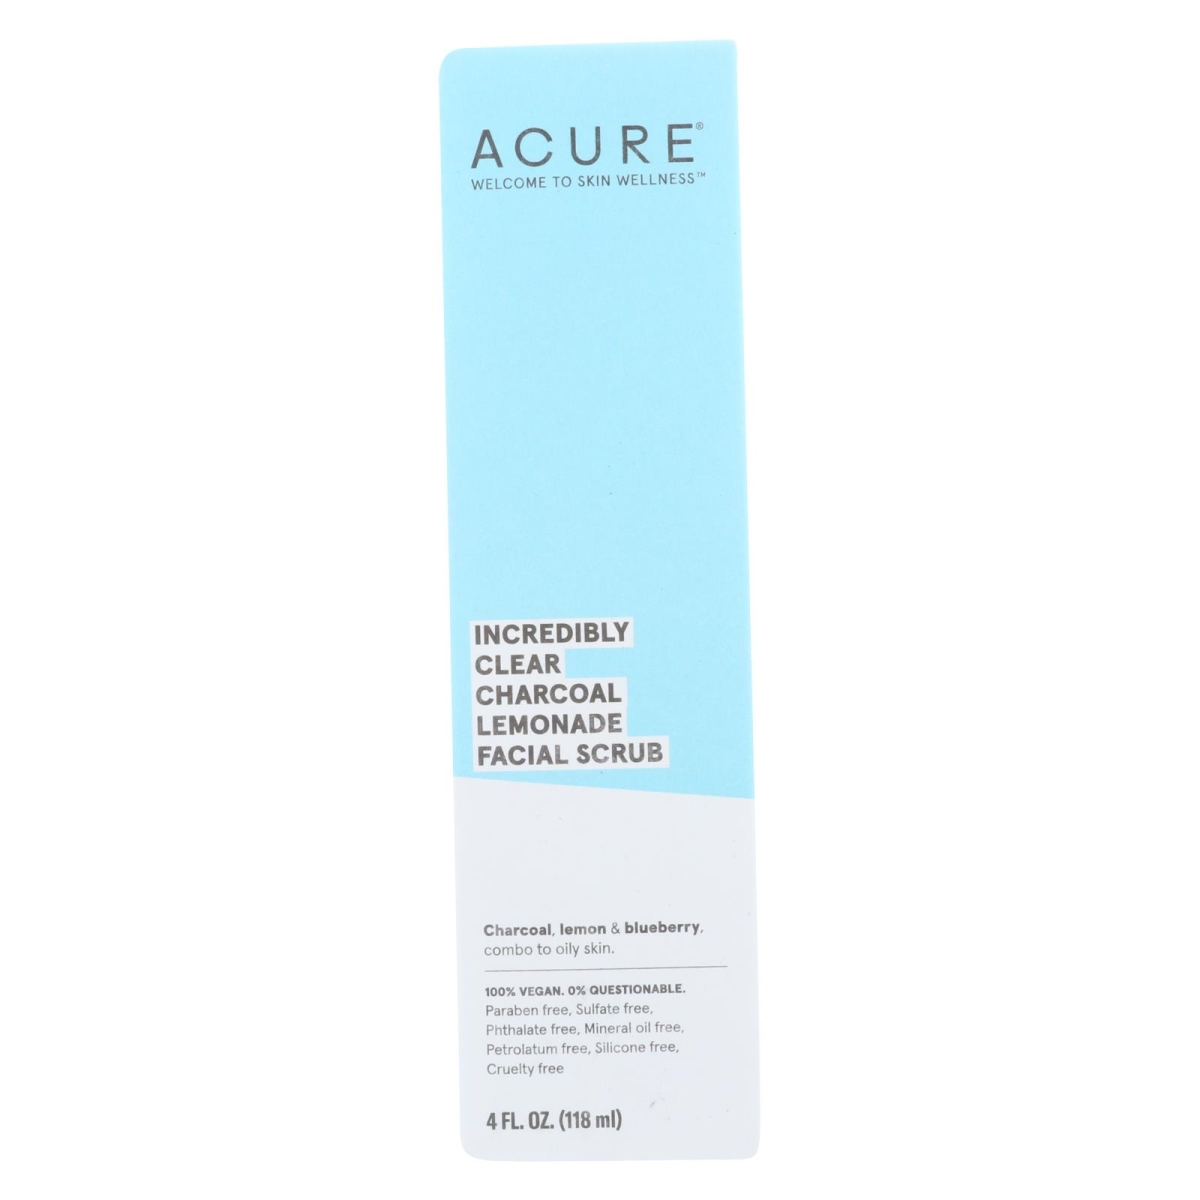 Picture of Acure 2344398 4 fl oz Charcoal Lemonade Facial Scrub - Incredibly Clear